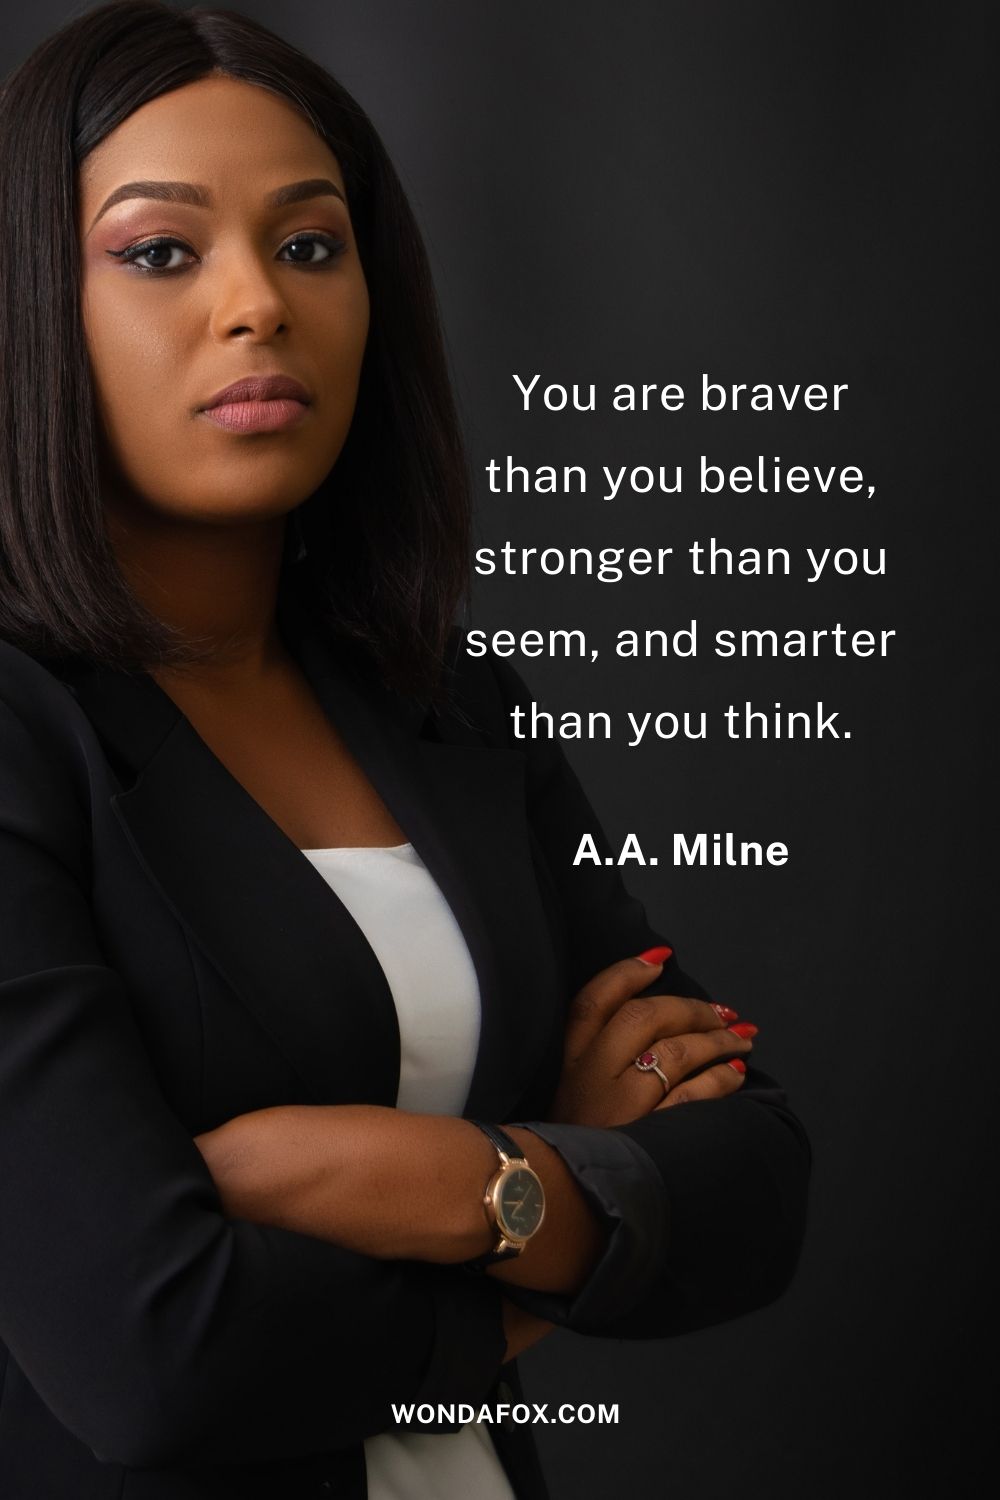 You are braver than you believe, stronger than you seem, and smarter than you think. boss girl quotes